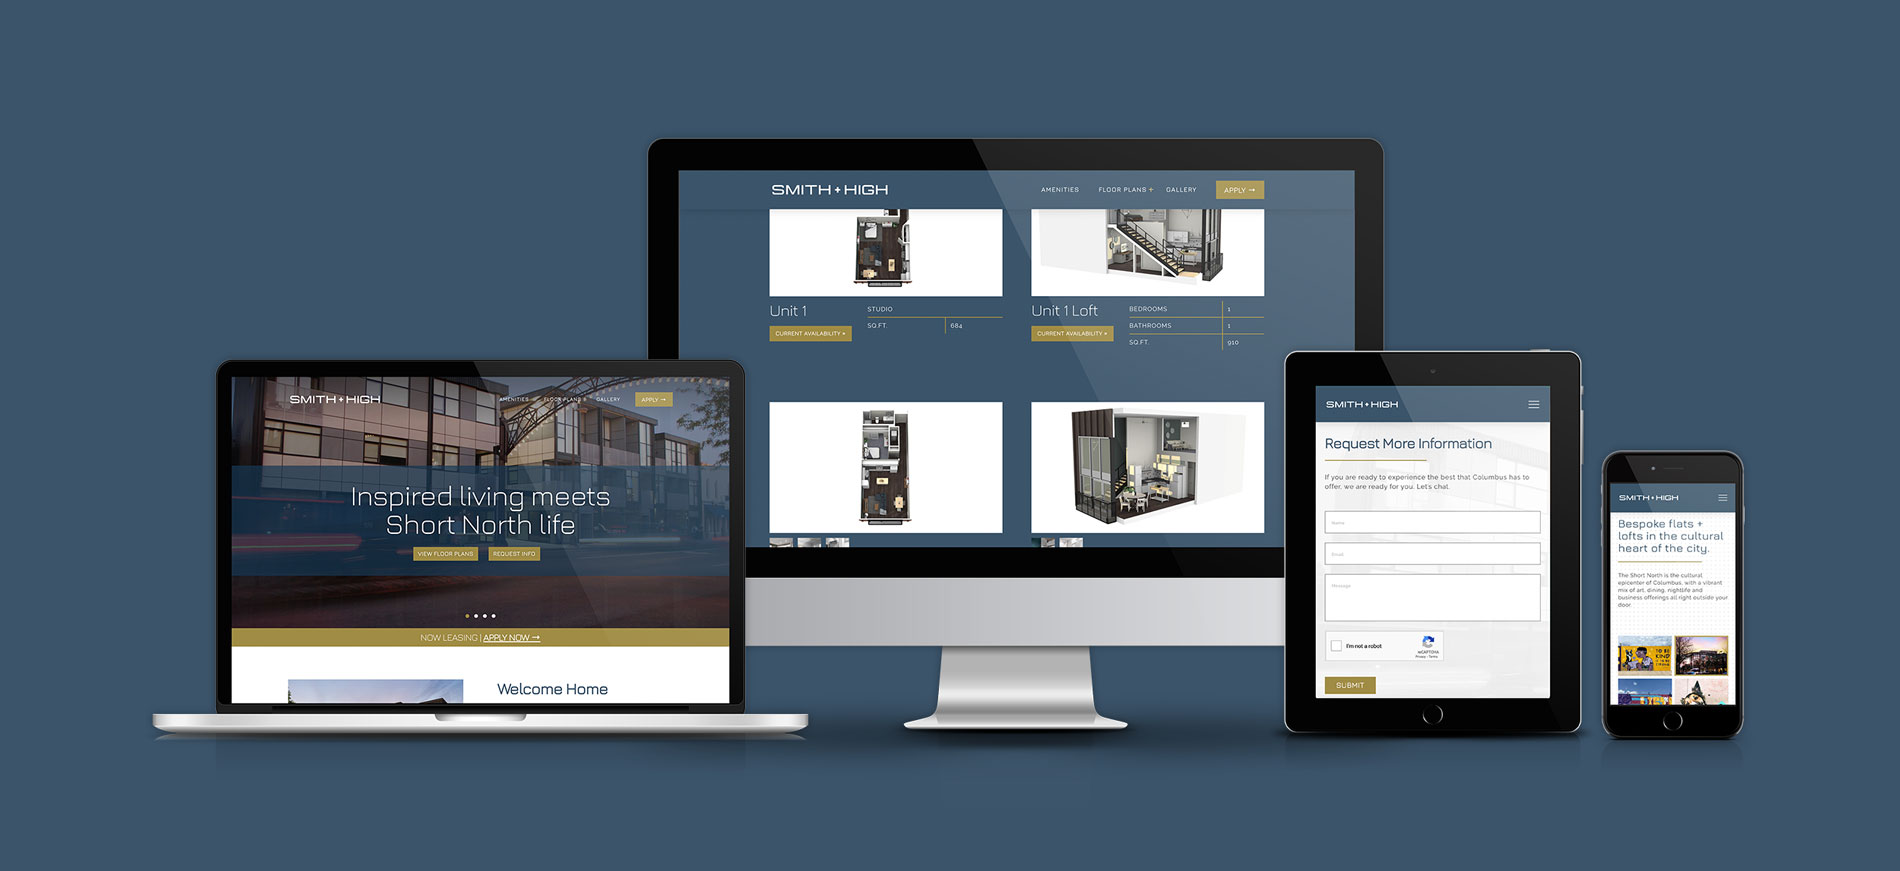 Smith + High website design for modern housing shown on multiple devices